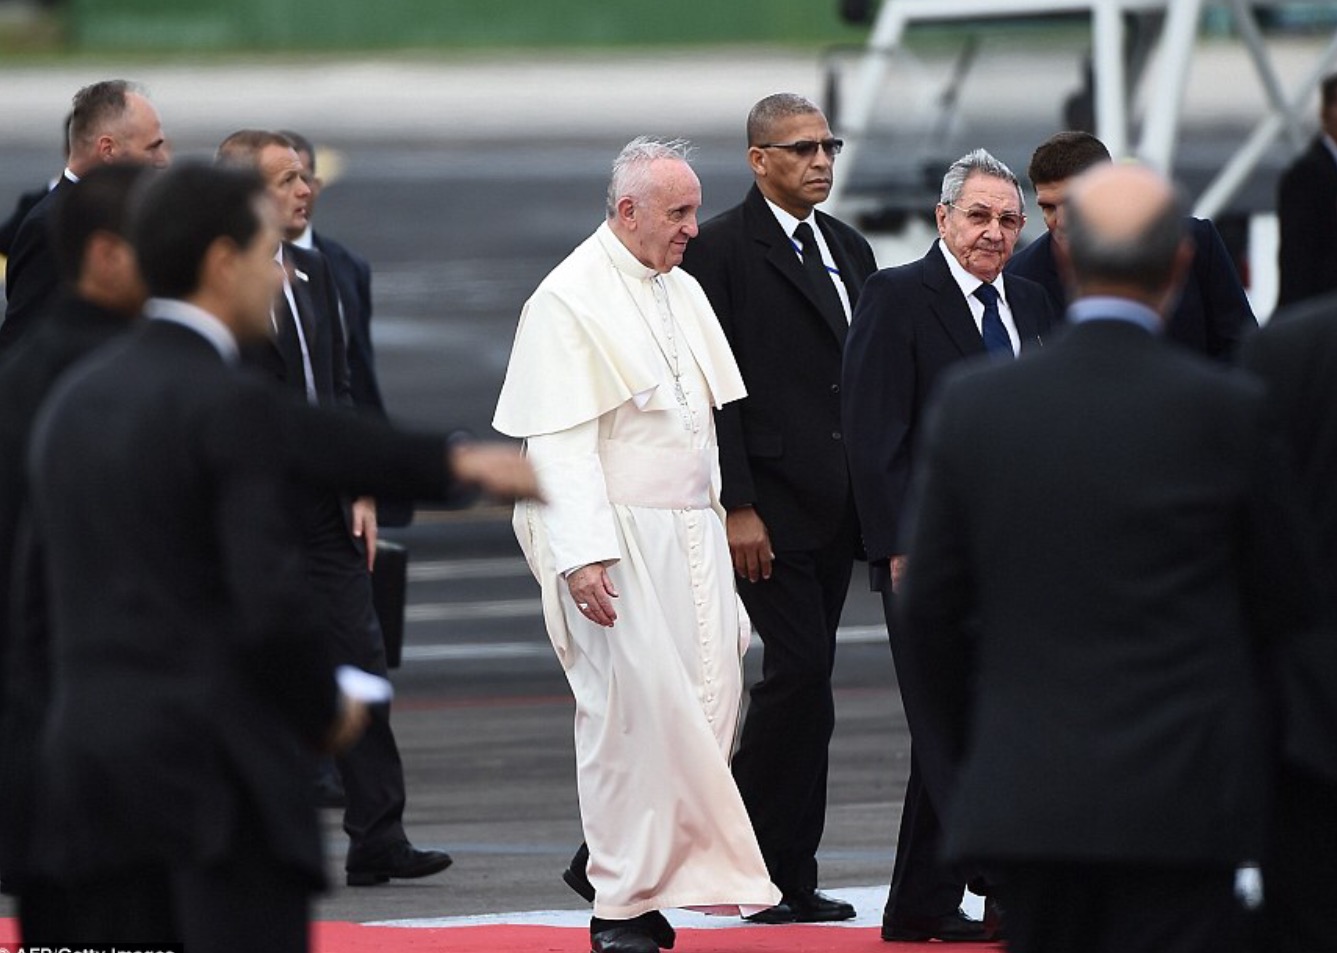 Pope Francis is welcomed by Cuban President Raul Castro upon landing at Havanas international airport on the first leg of a high-profile trip that will also take him to the United States  Read more: http://www.dailymail.co.uk/news/article-3241331/Pope-Francis-arrives-Havana-today-trip-Cuba-United-States-brokering-historic-detente-former-Cold-War-foes.html#ixzz3mEuIvdxk  Follow us: @MailOnline on Twitter | DailyMail on Facebook